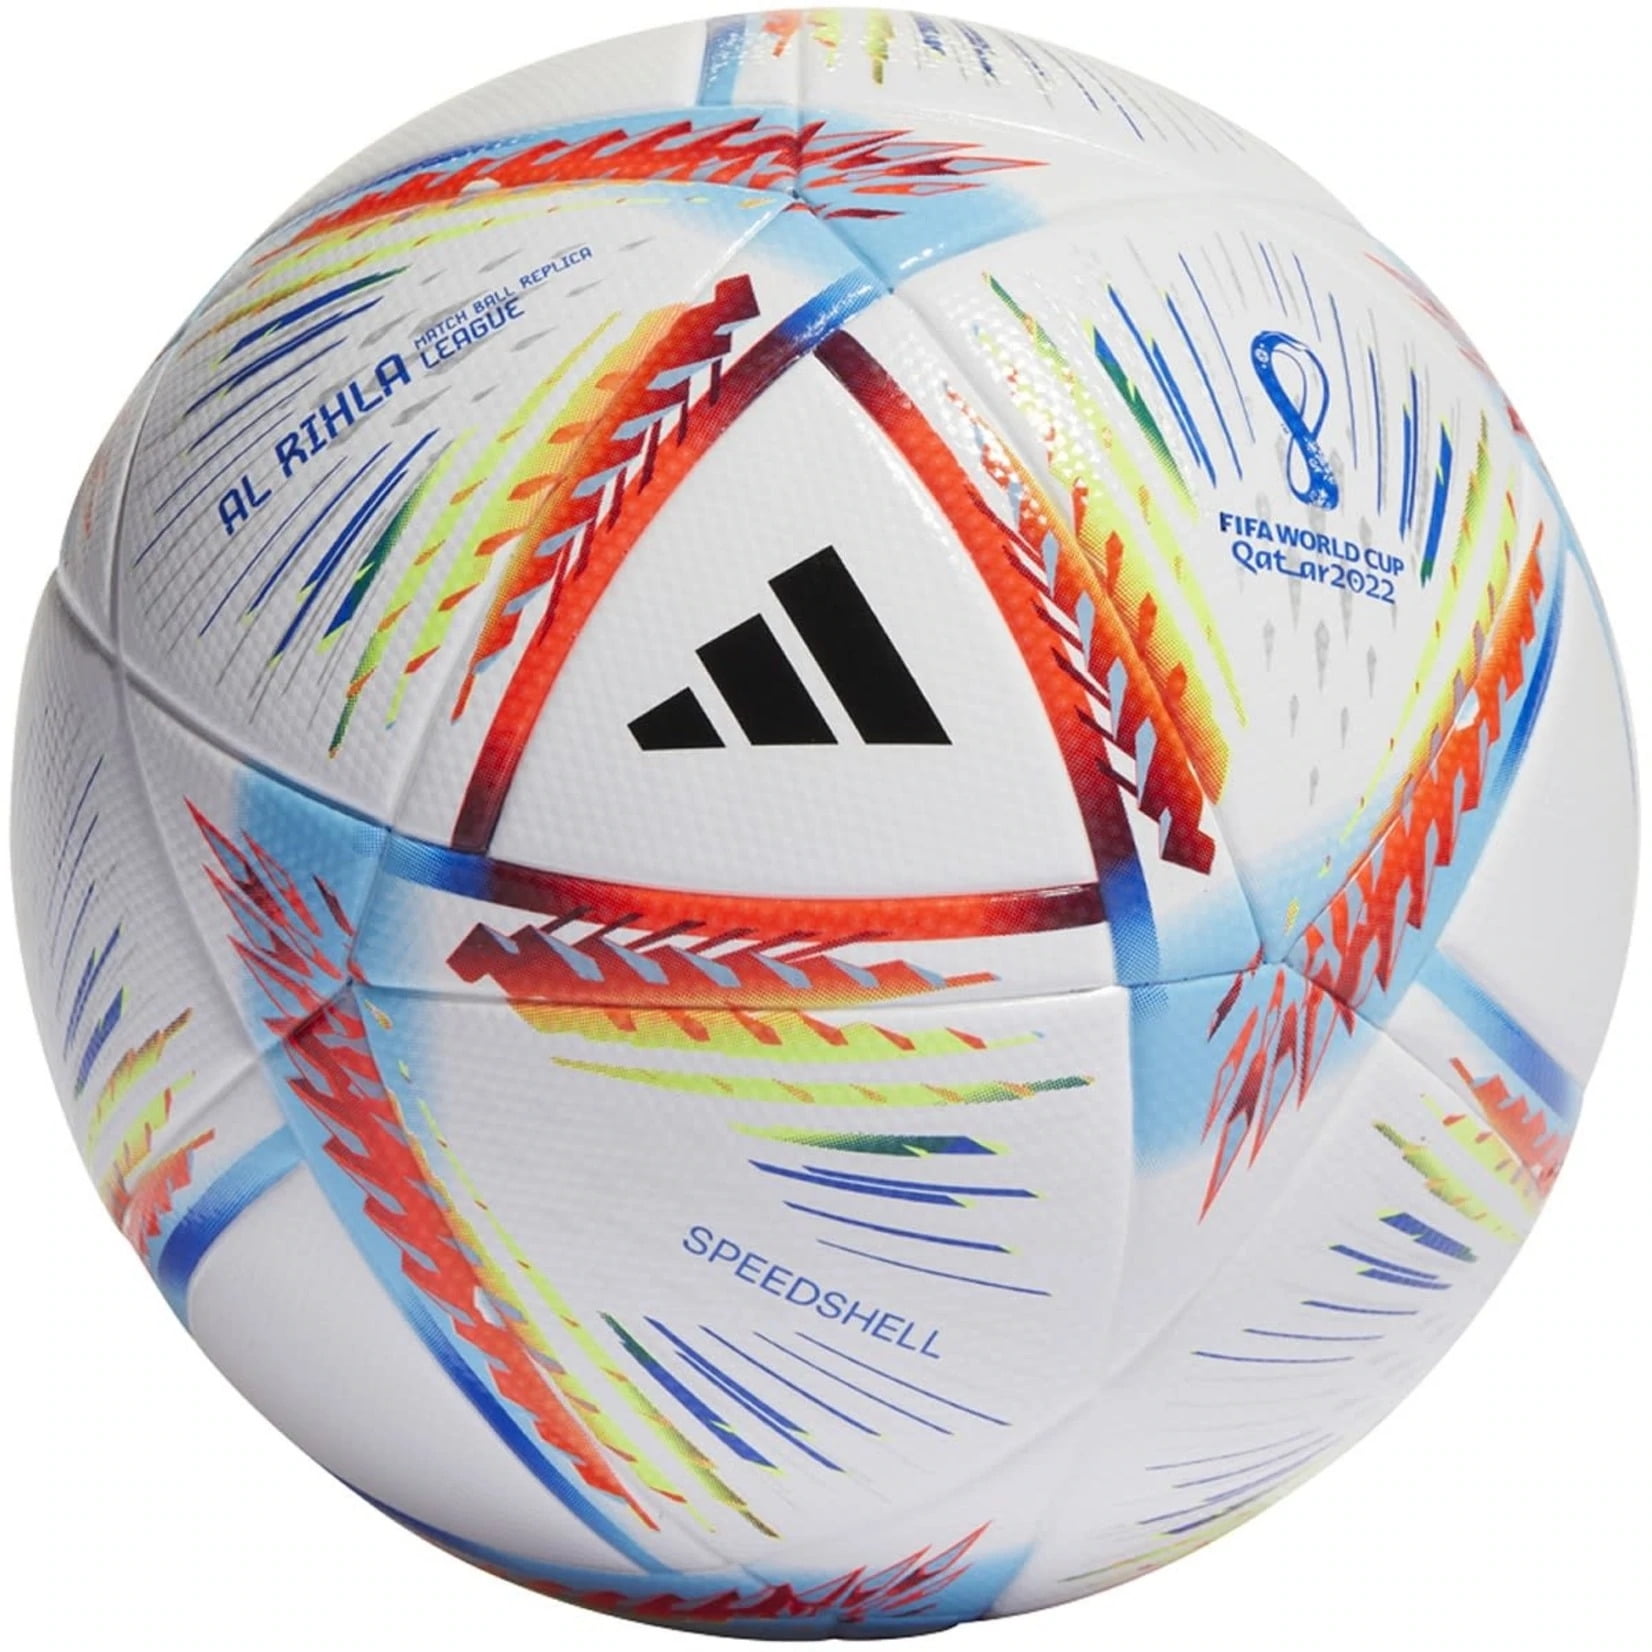 adidas Pro 3.0 Adult Official Game Ball